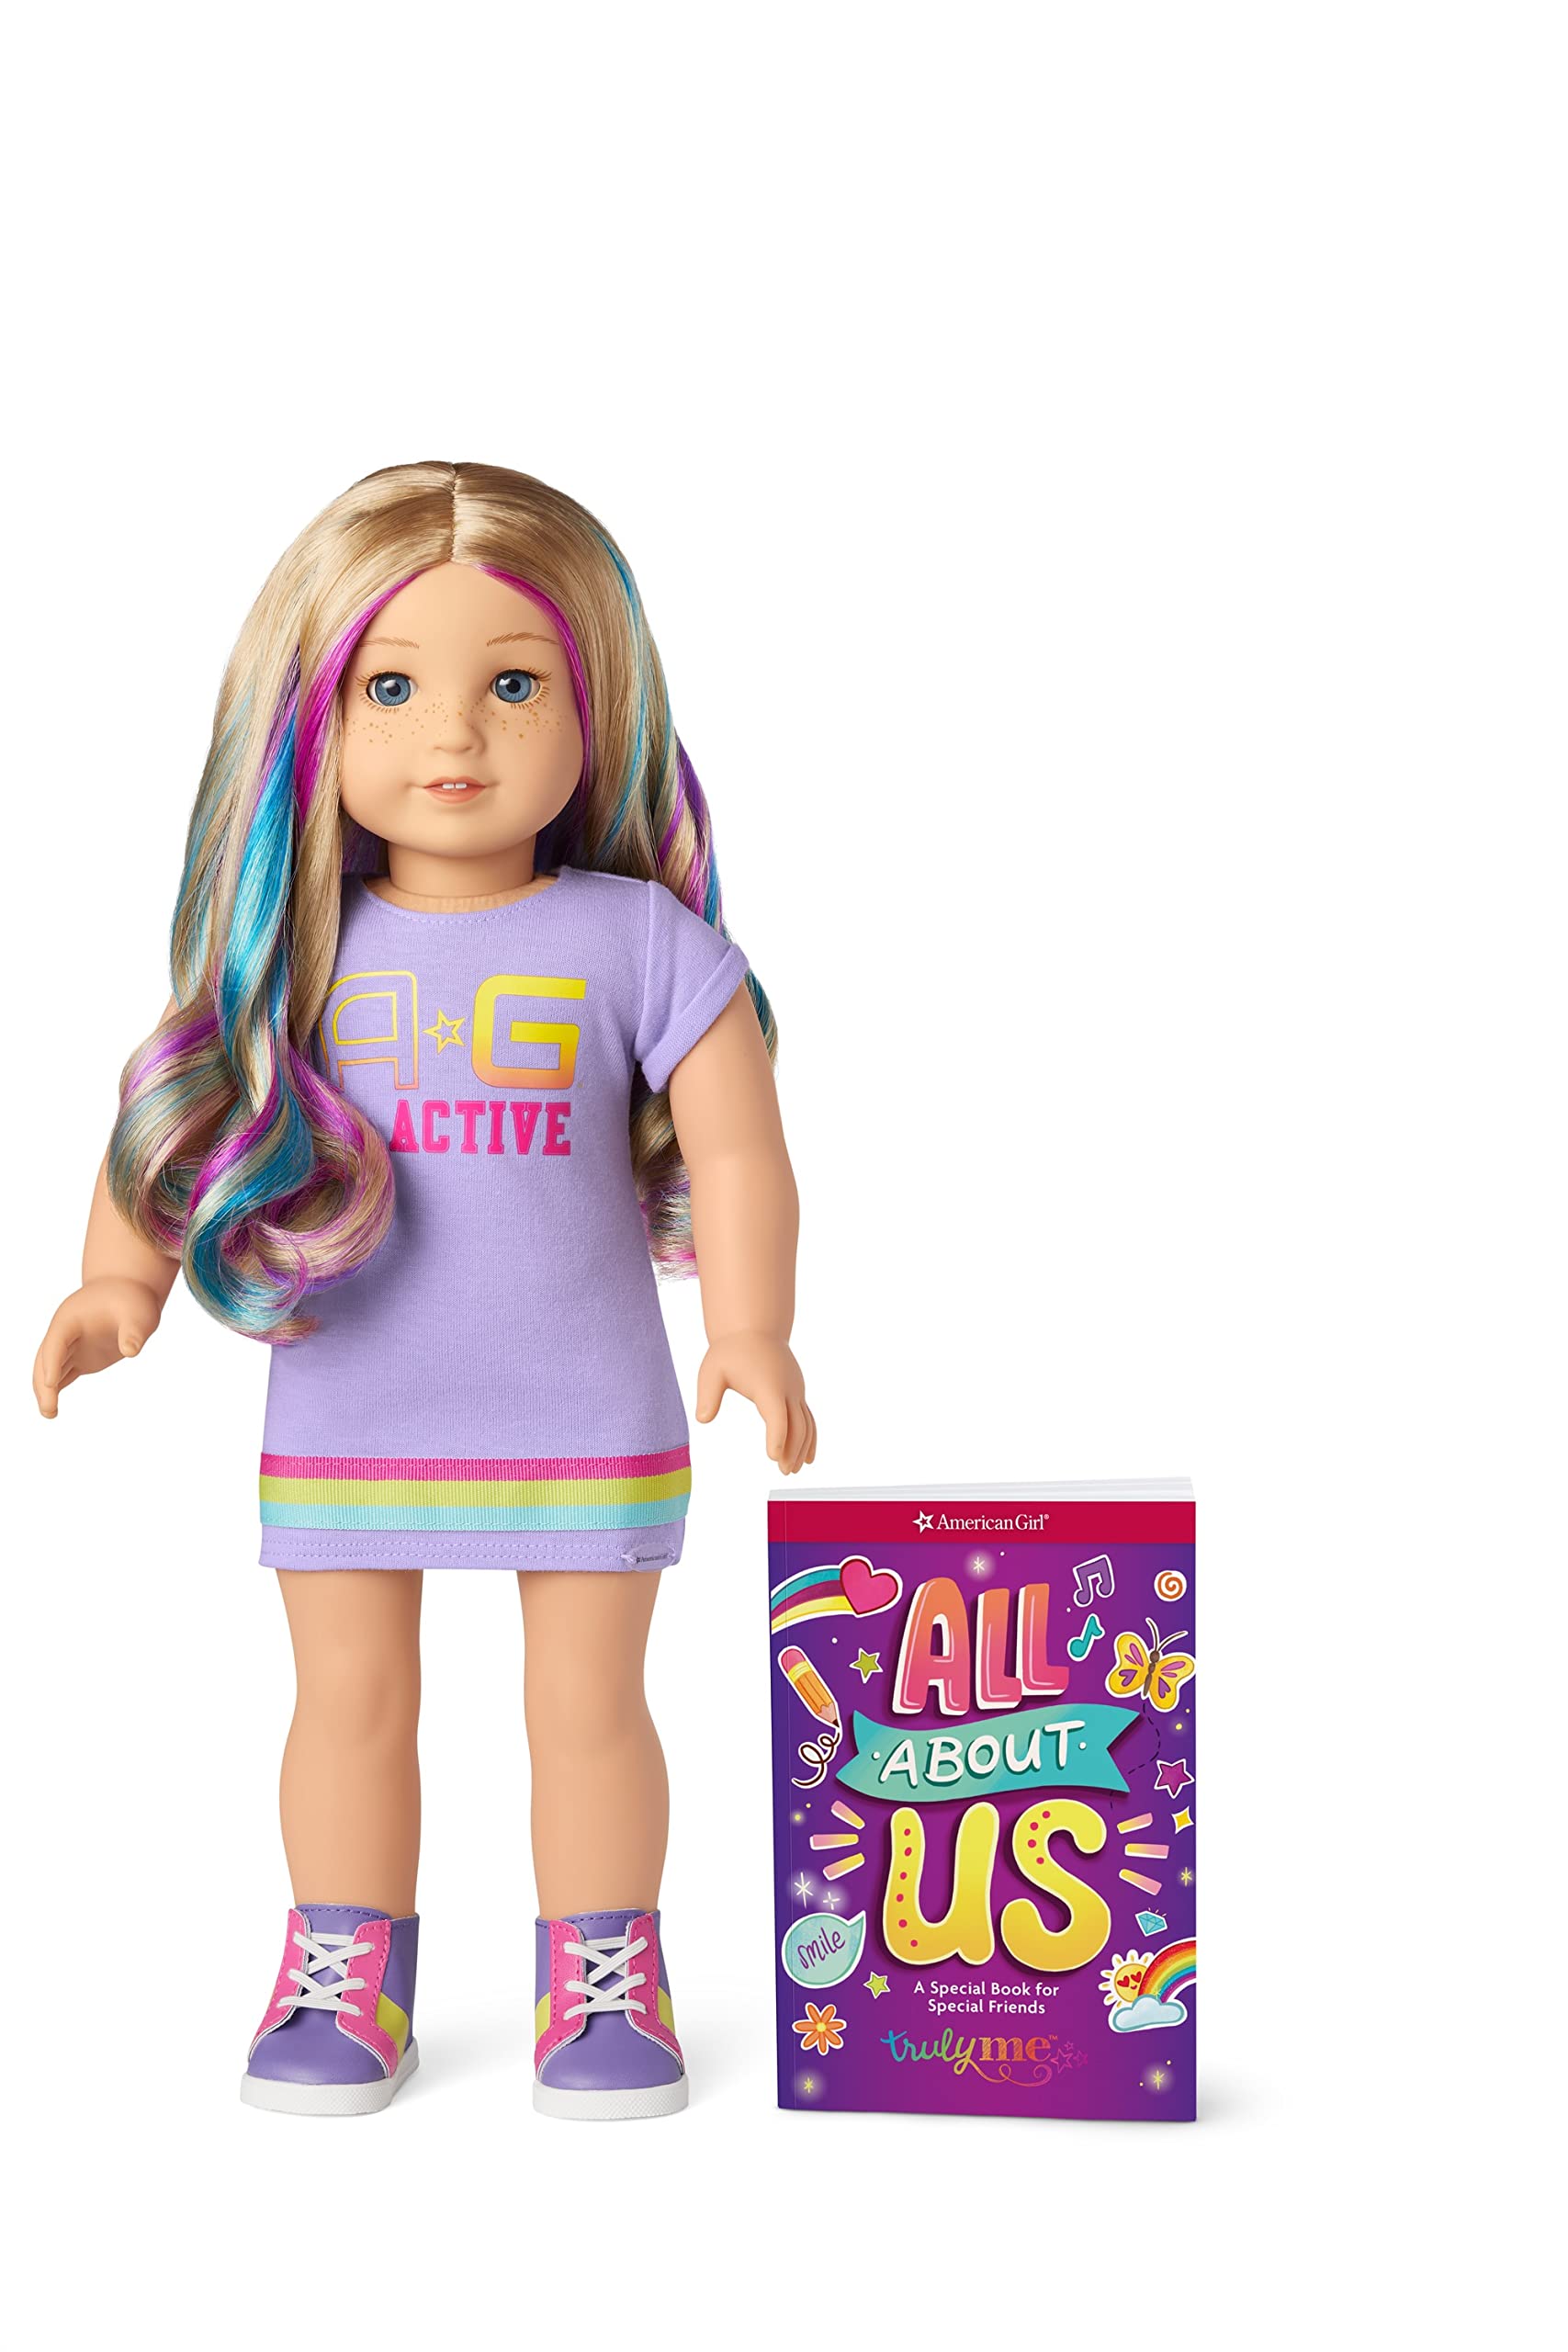 American Girl Truly Me 18-Inch Doll 110 with Light-Blue Eyes, Wavy Blonde Hair with Purple and Blue Highlights, Light Skin with Warm Olive Undertones, Purple Printed T-Shirt Dress